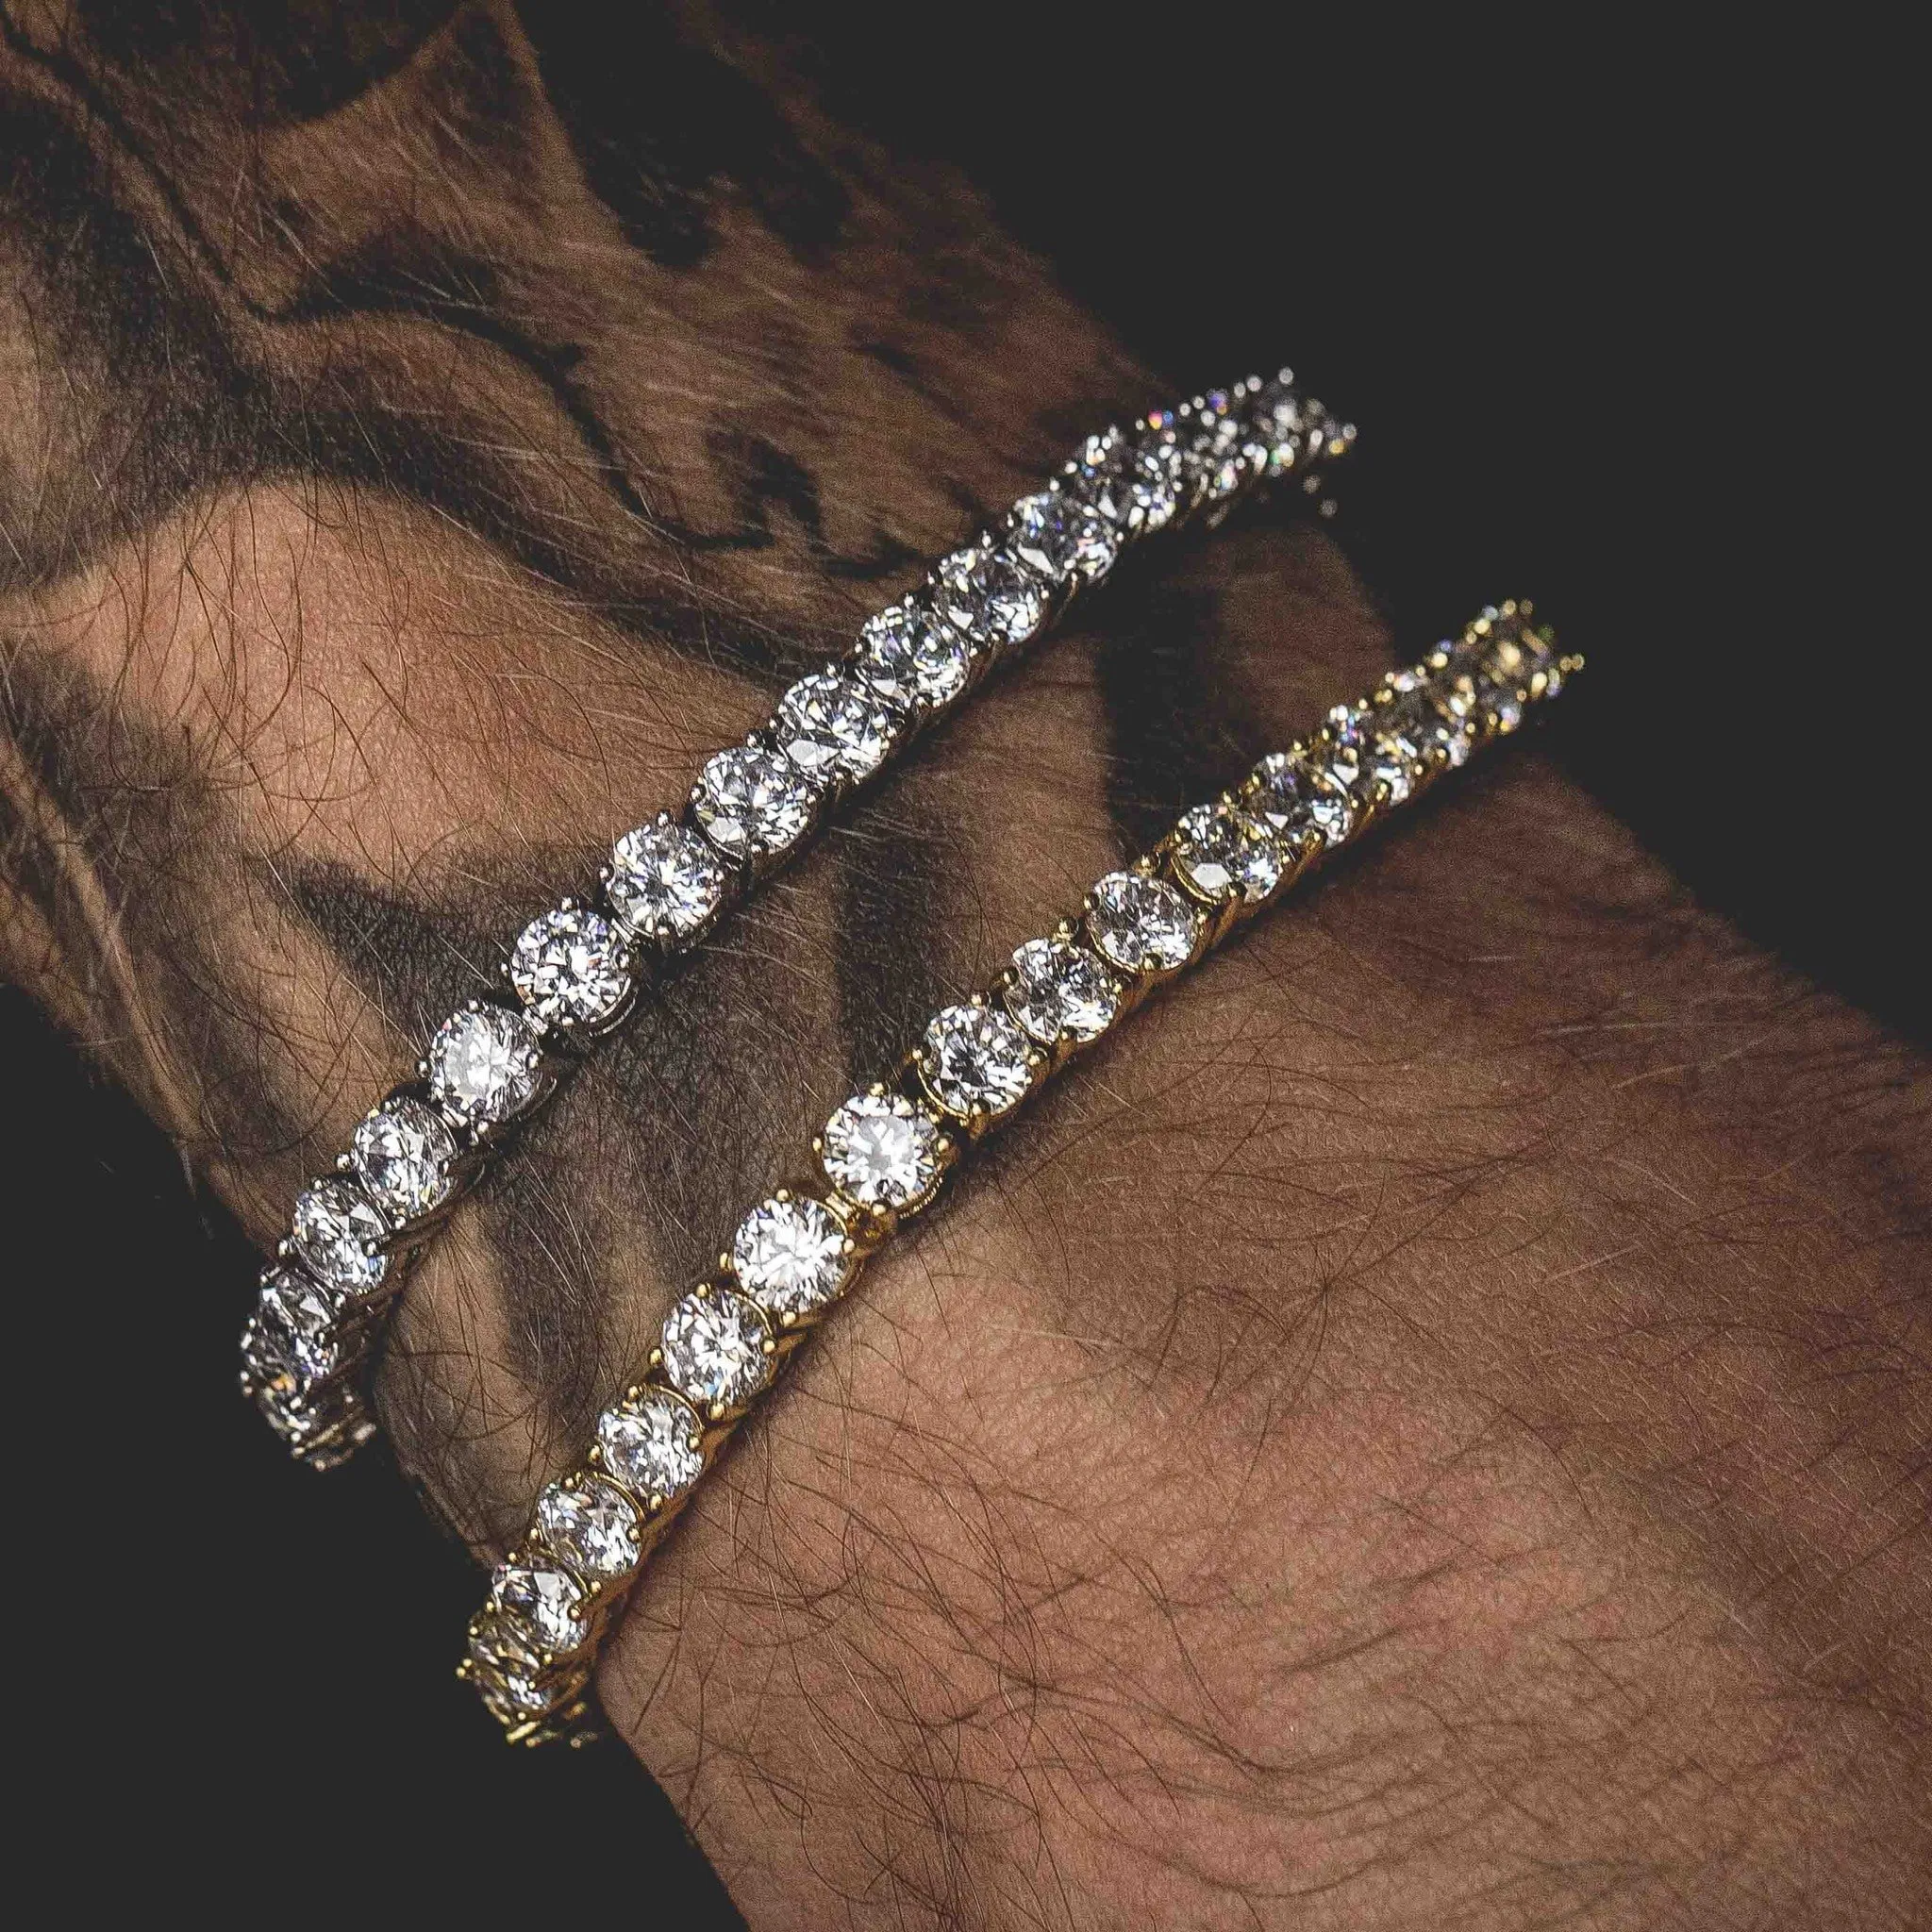 Mens Iced Out Tennis Chain Gold Silver Bracelet Fashion Hip Hop CZ Bracelets Jewelry 3/4/5mm 7/8inch